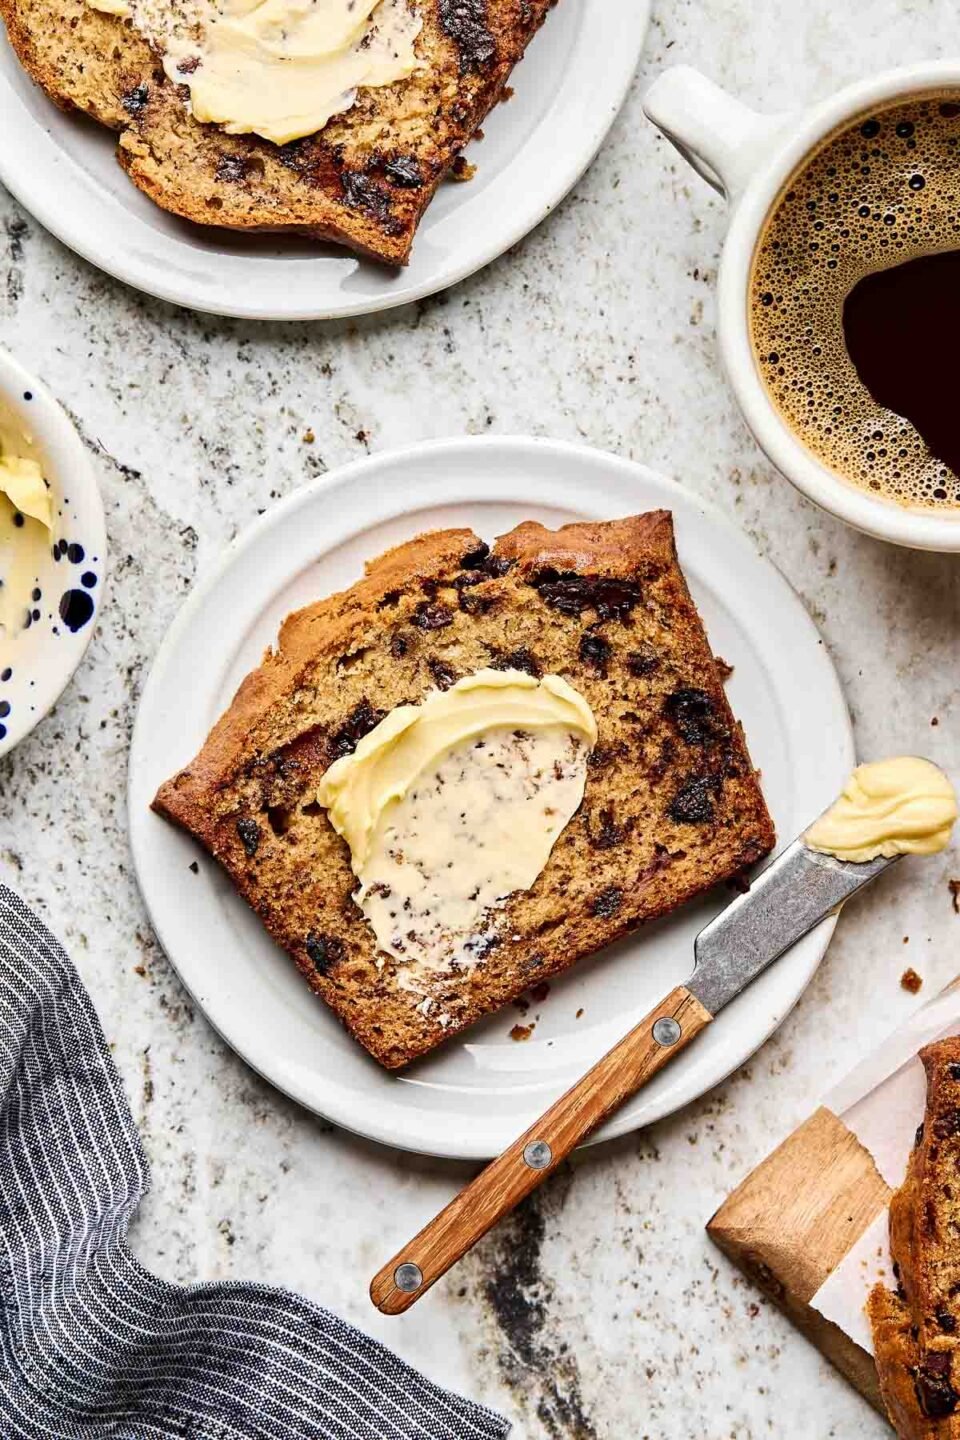 An overhead shot of a slice of chocolate chip banana bread slathered with butter on a white plate atop a grey textured surface. A butter knife with a pat of butter sits alongside it, and a second plate of banana bread, a cup of coffee, and the loaf of banana bread sit alongside the plate.